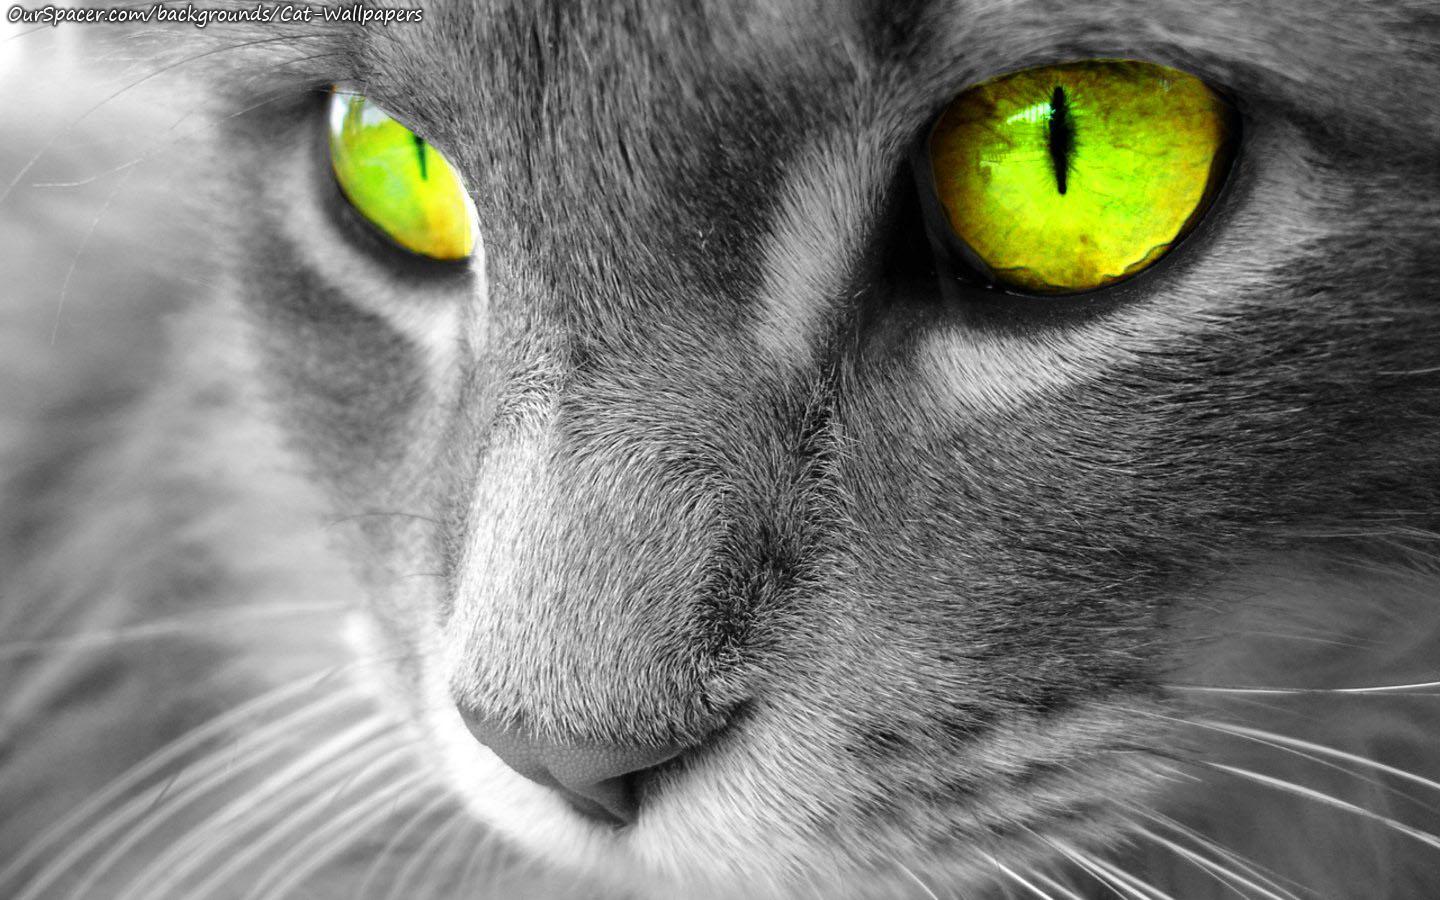 Closeup of a grey cat with yellow eyes wallpaper and background for myspace and twitter layouts